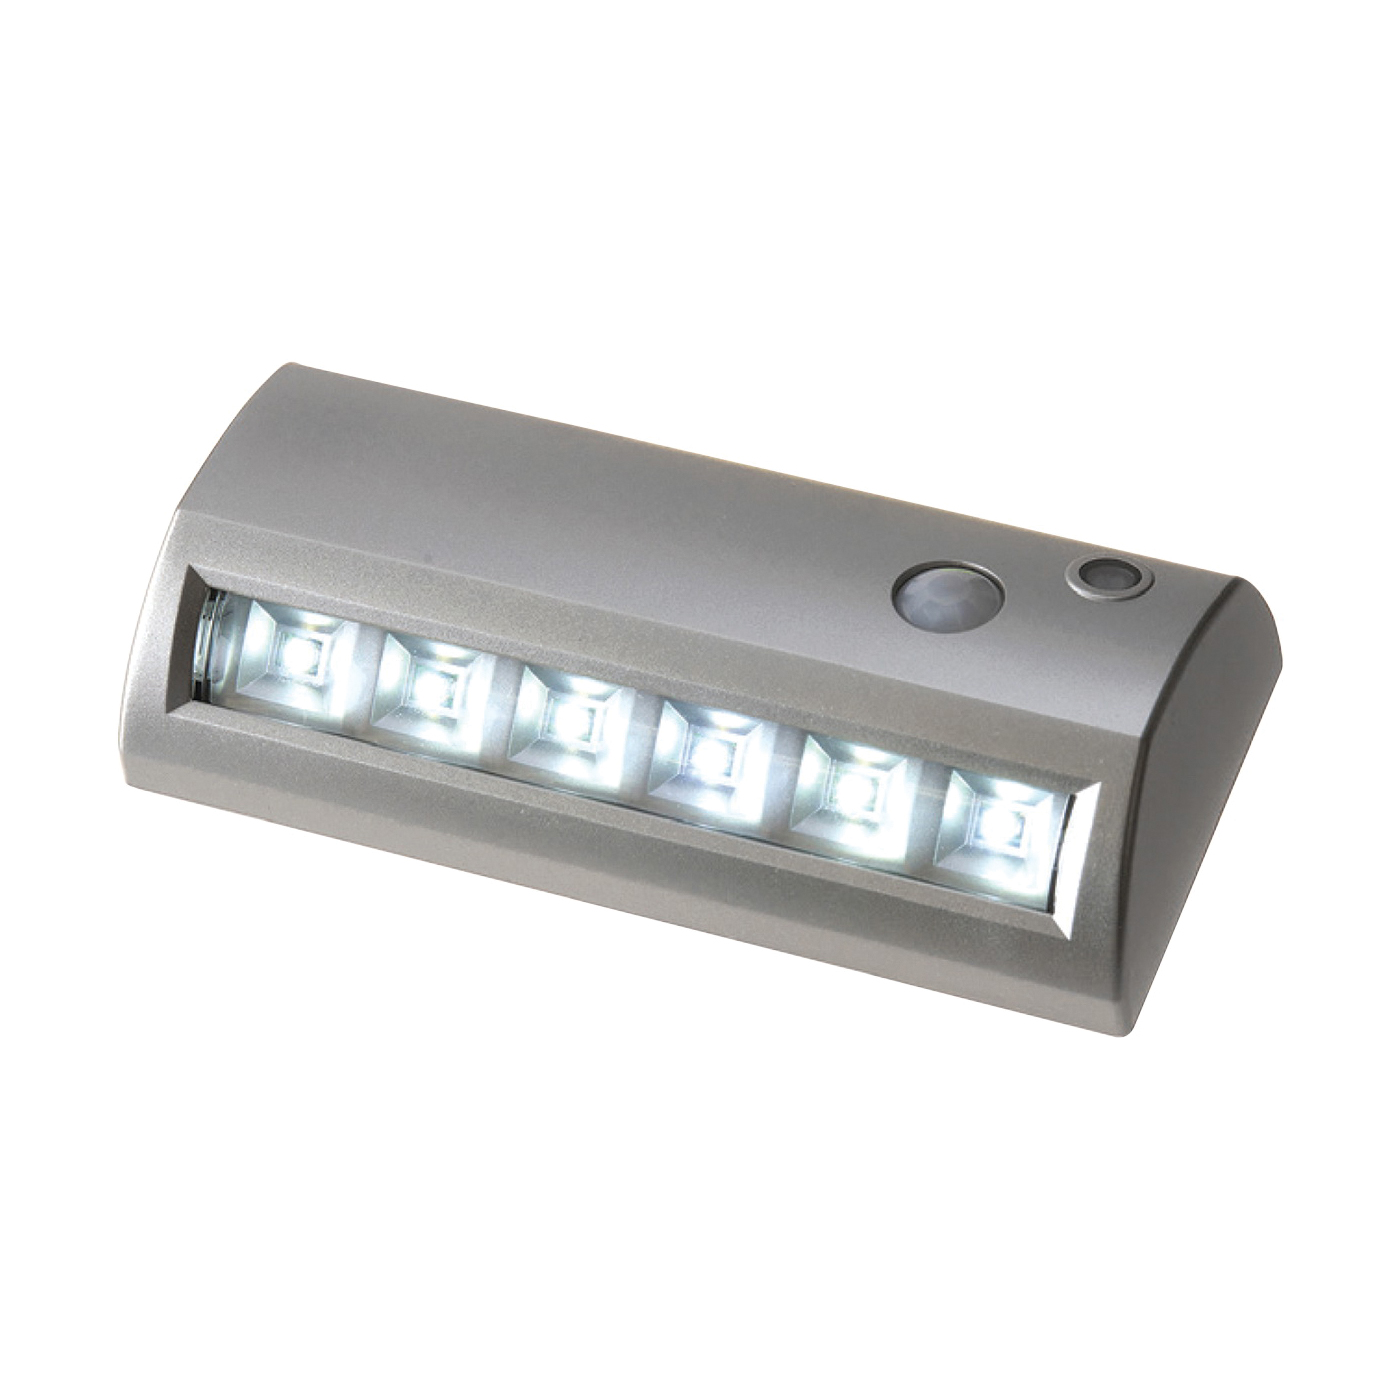 20032-301 Motion Activated Path Light, AA Battery, 6-Lamp, LED Lamp, 42 Lumens Lumens, 7000 K Color Temp